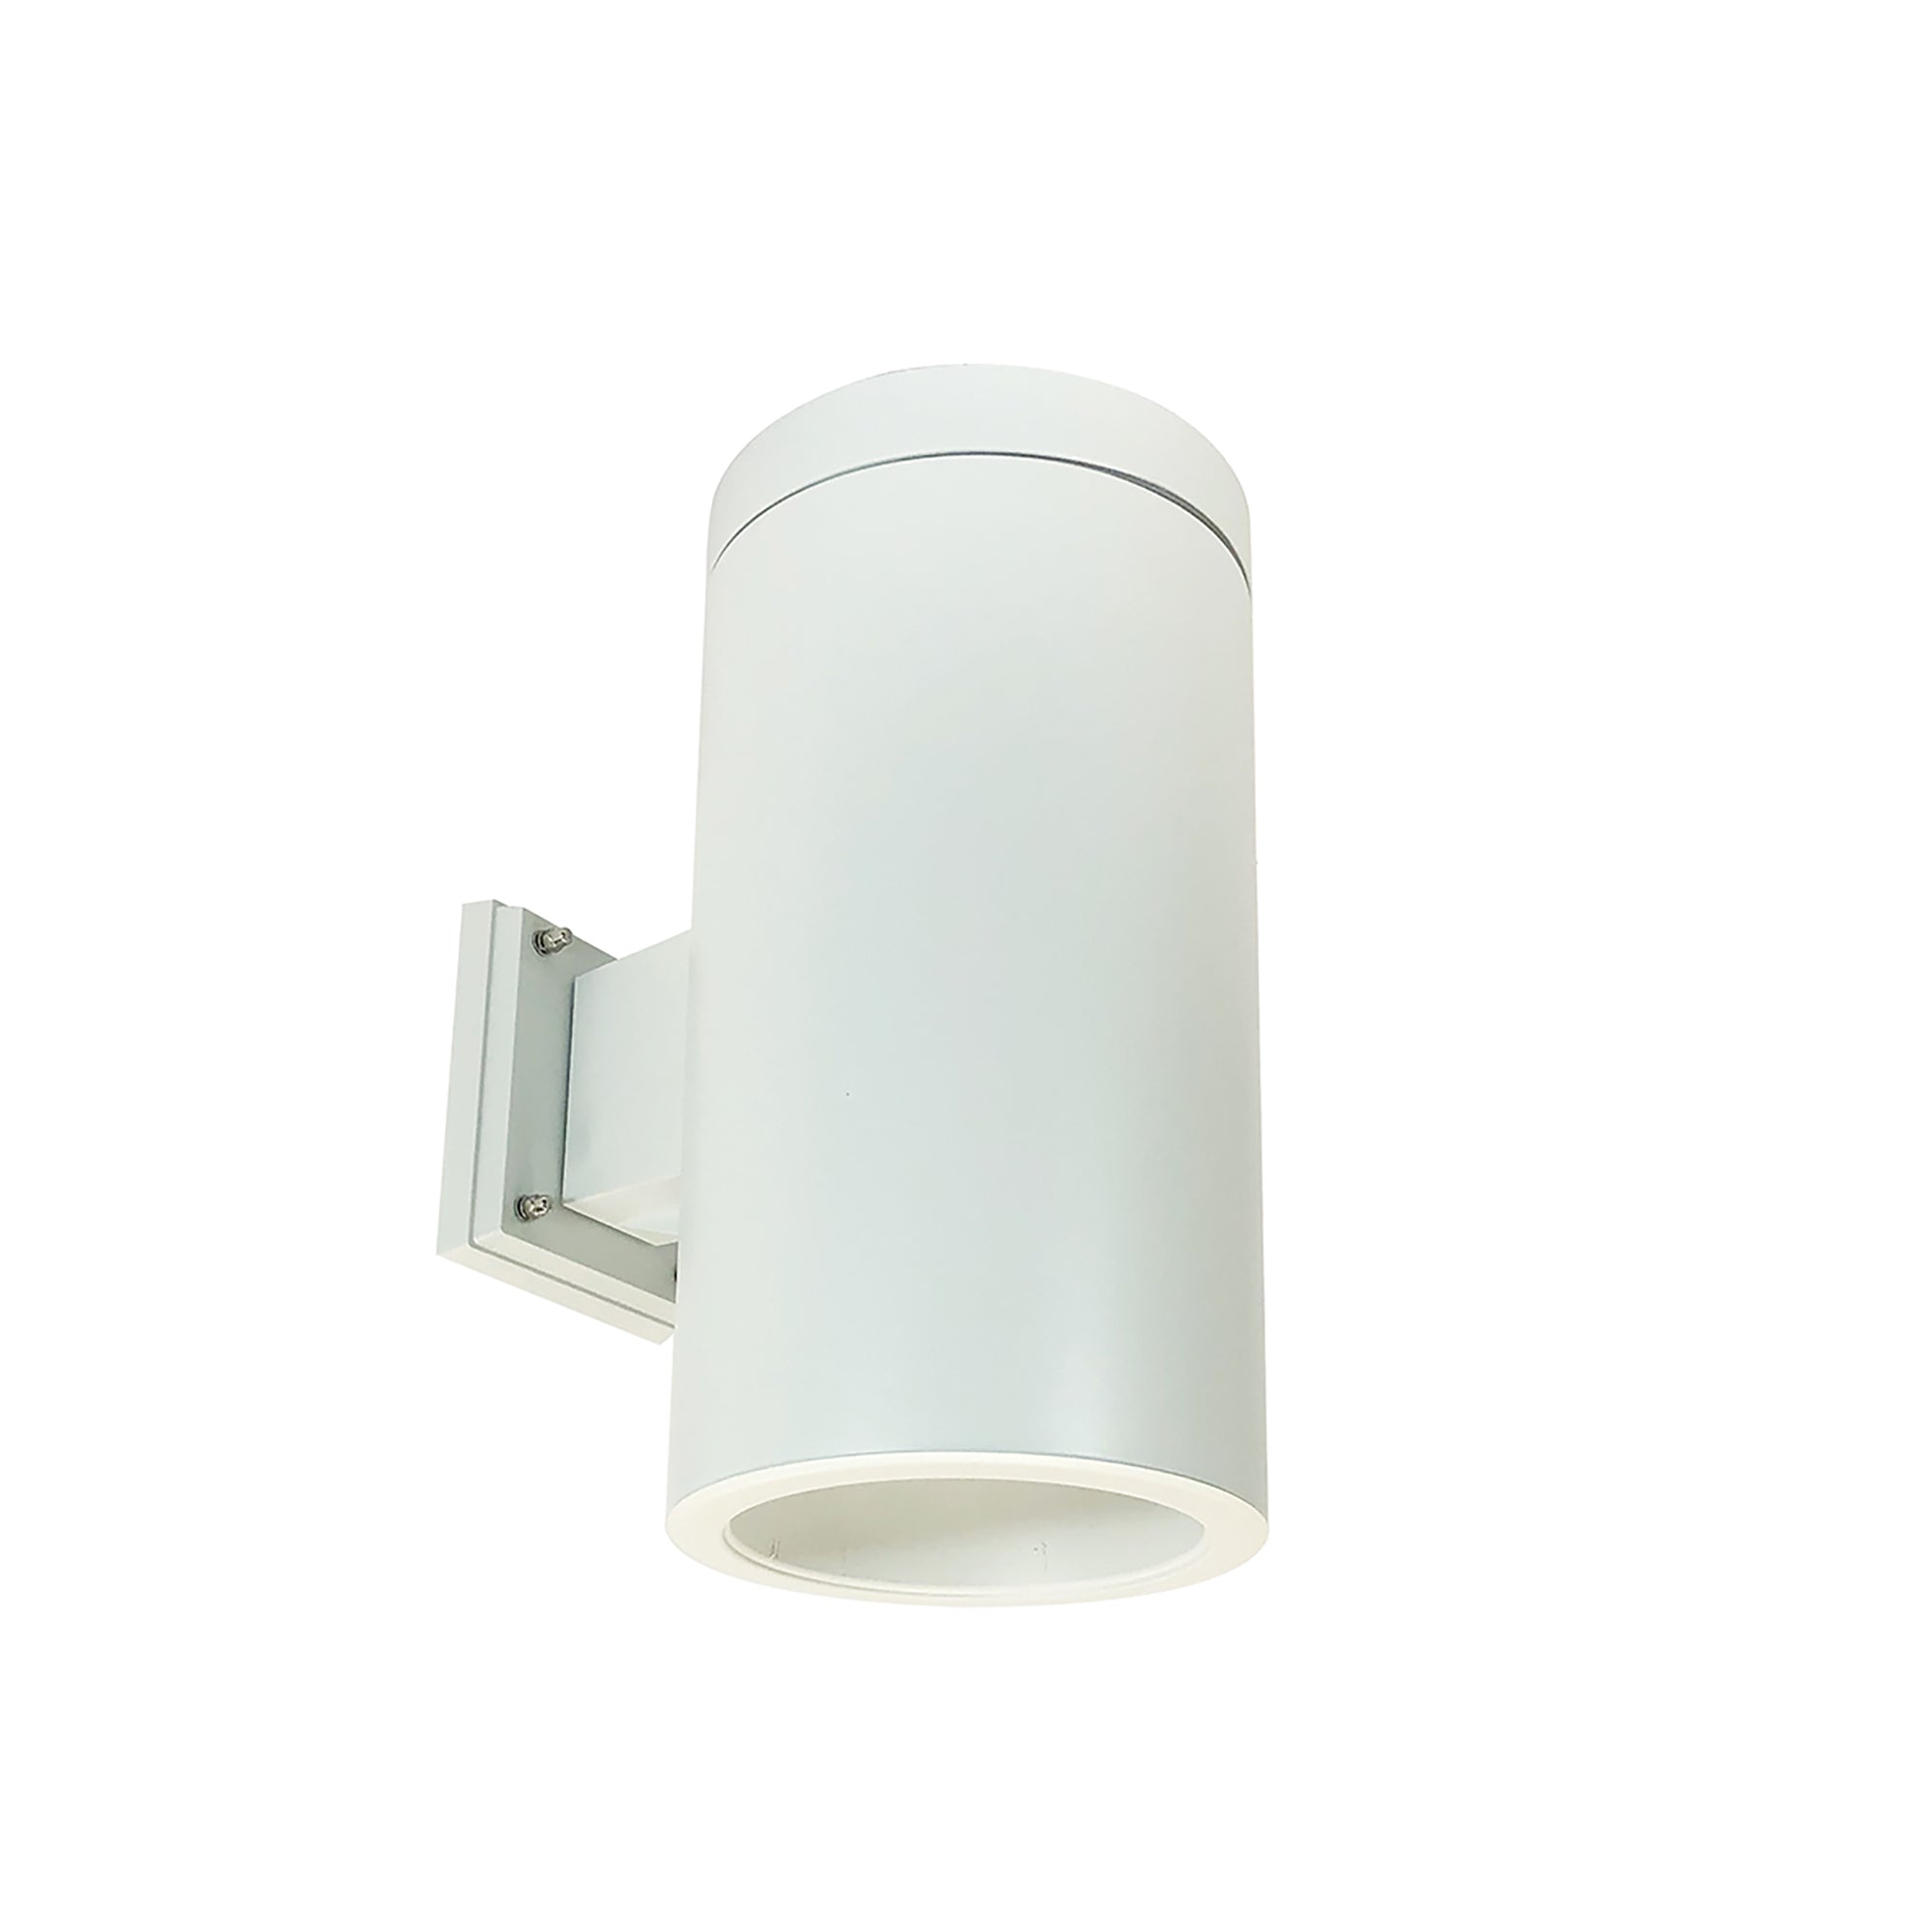 Nora Lighting NYLS2-6W15127SWWW6 - Cylinder - 6 Inch CYL WALL MNT 1500L 27K REF. SPOT WH/WH FLANGE 120-277V WH CYL